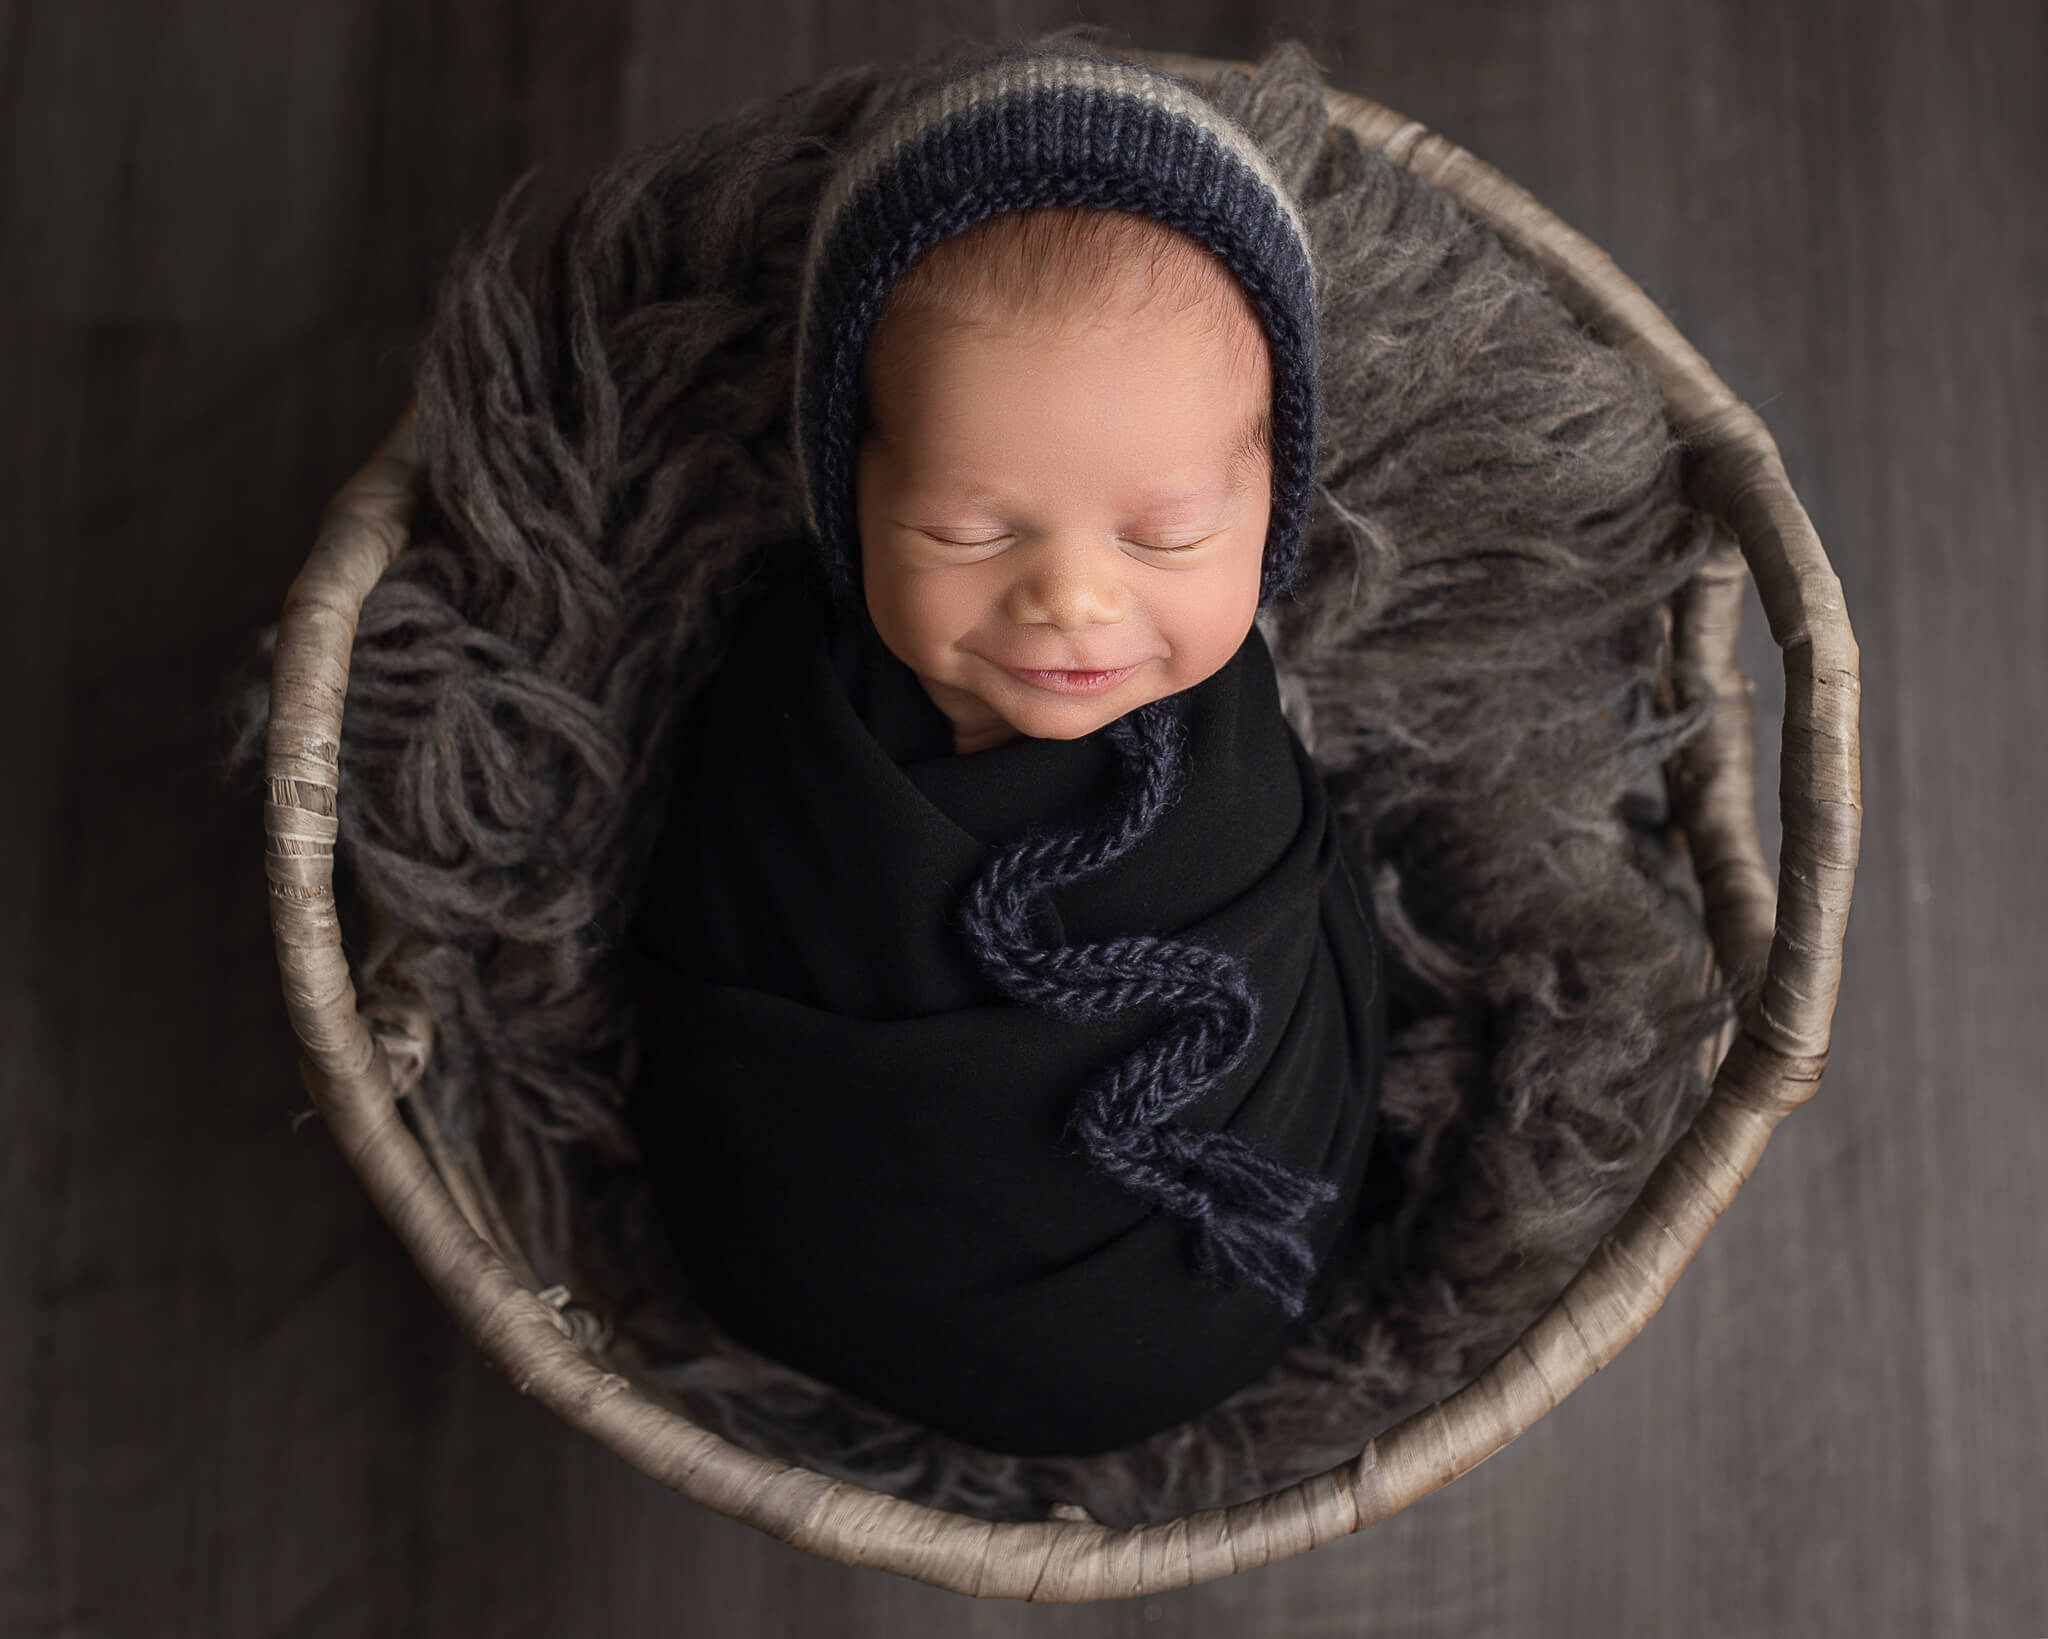 best places to buy newborn winter clothes in blog photo of smiling sleeping baby in fur wrap in basket